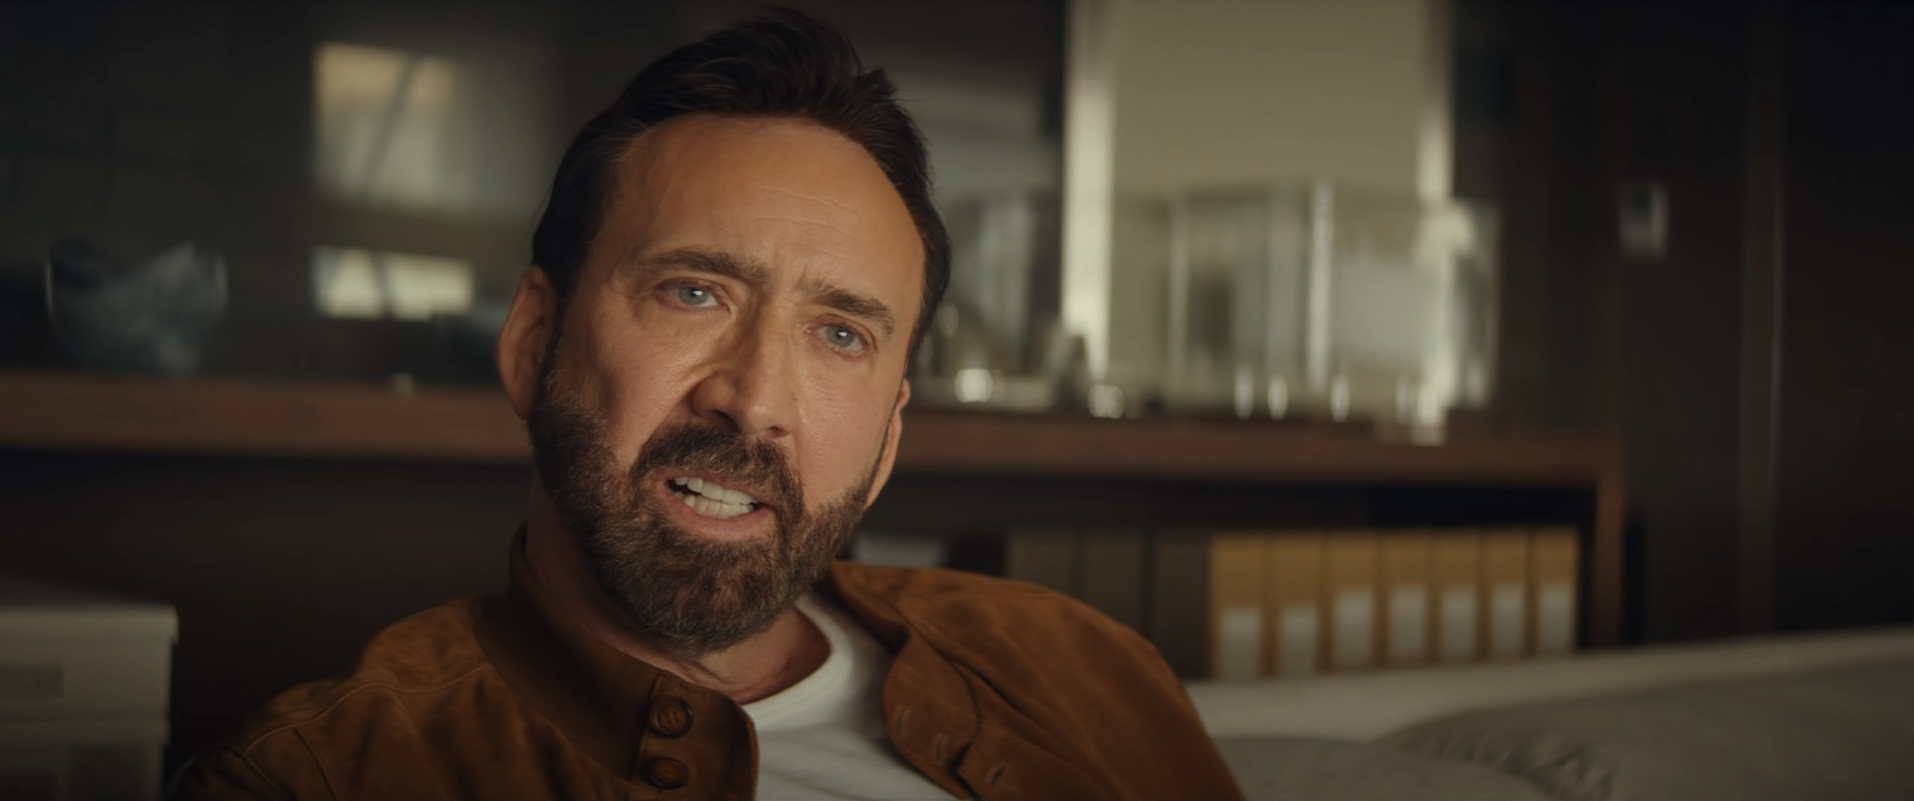 Nicolas Cage talks about his first reaction to his new movie